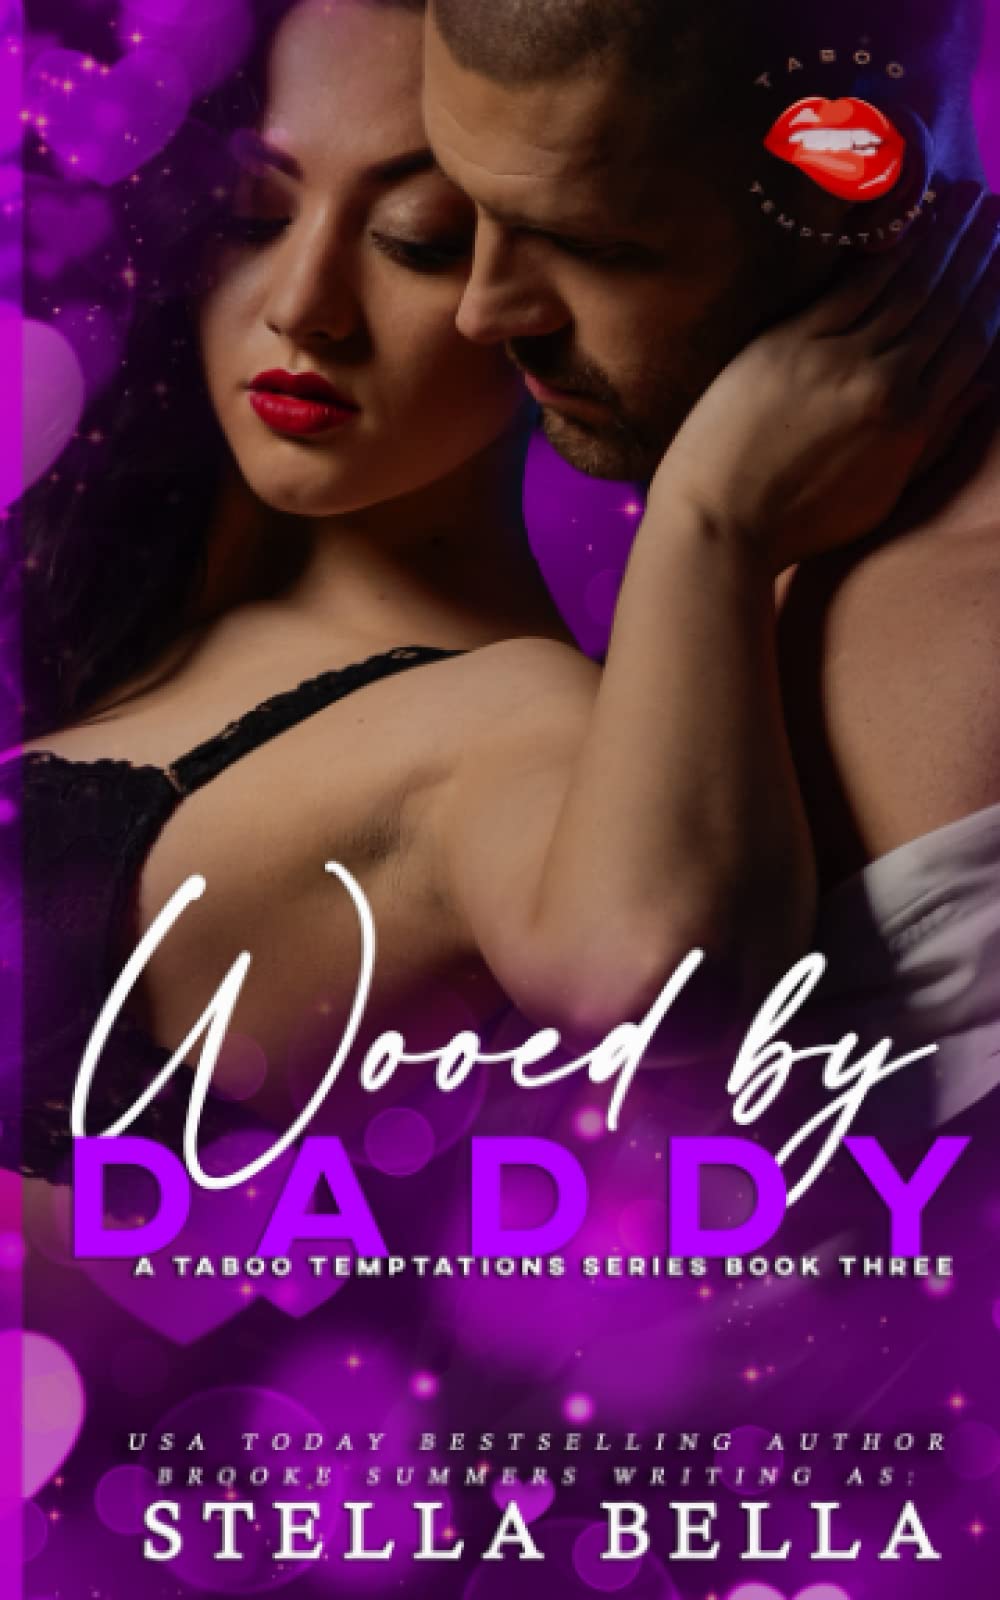 christine capili recommends Taboo Temptations